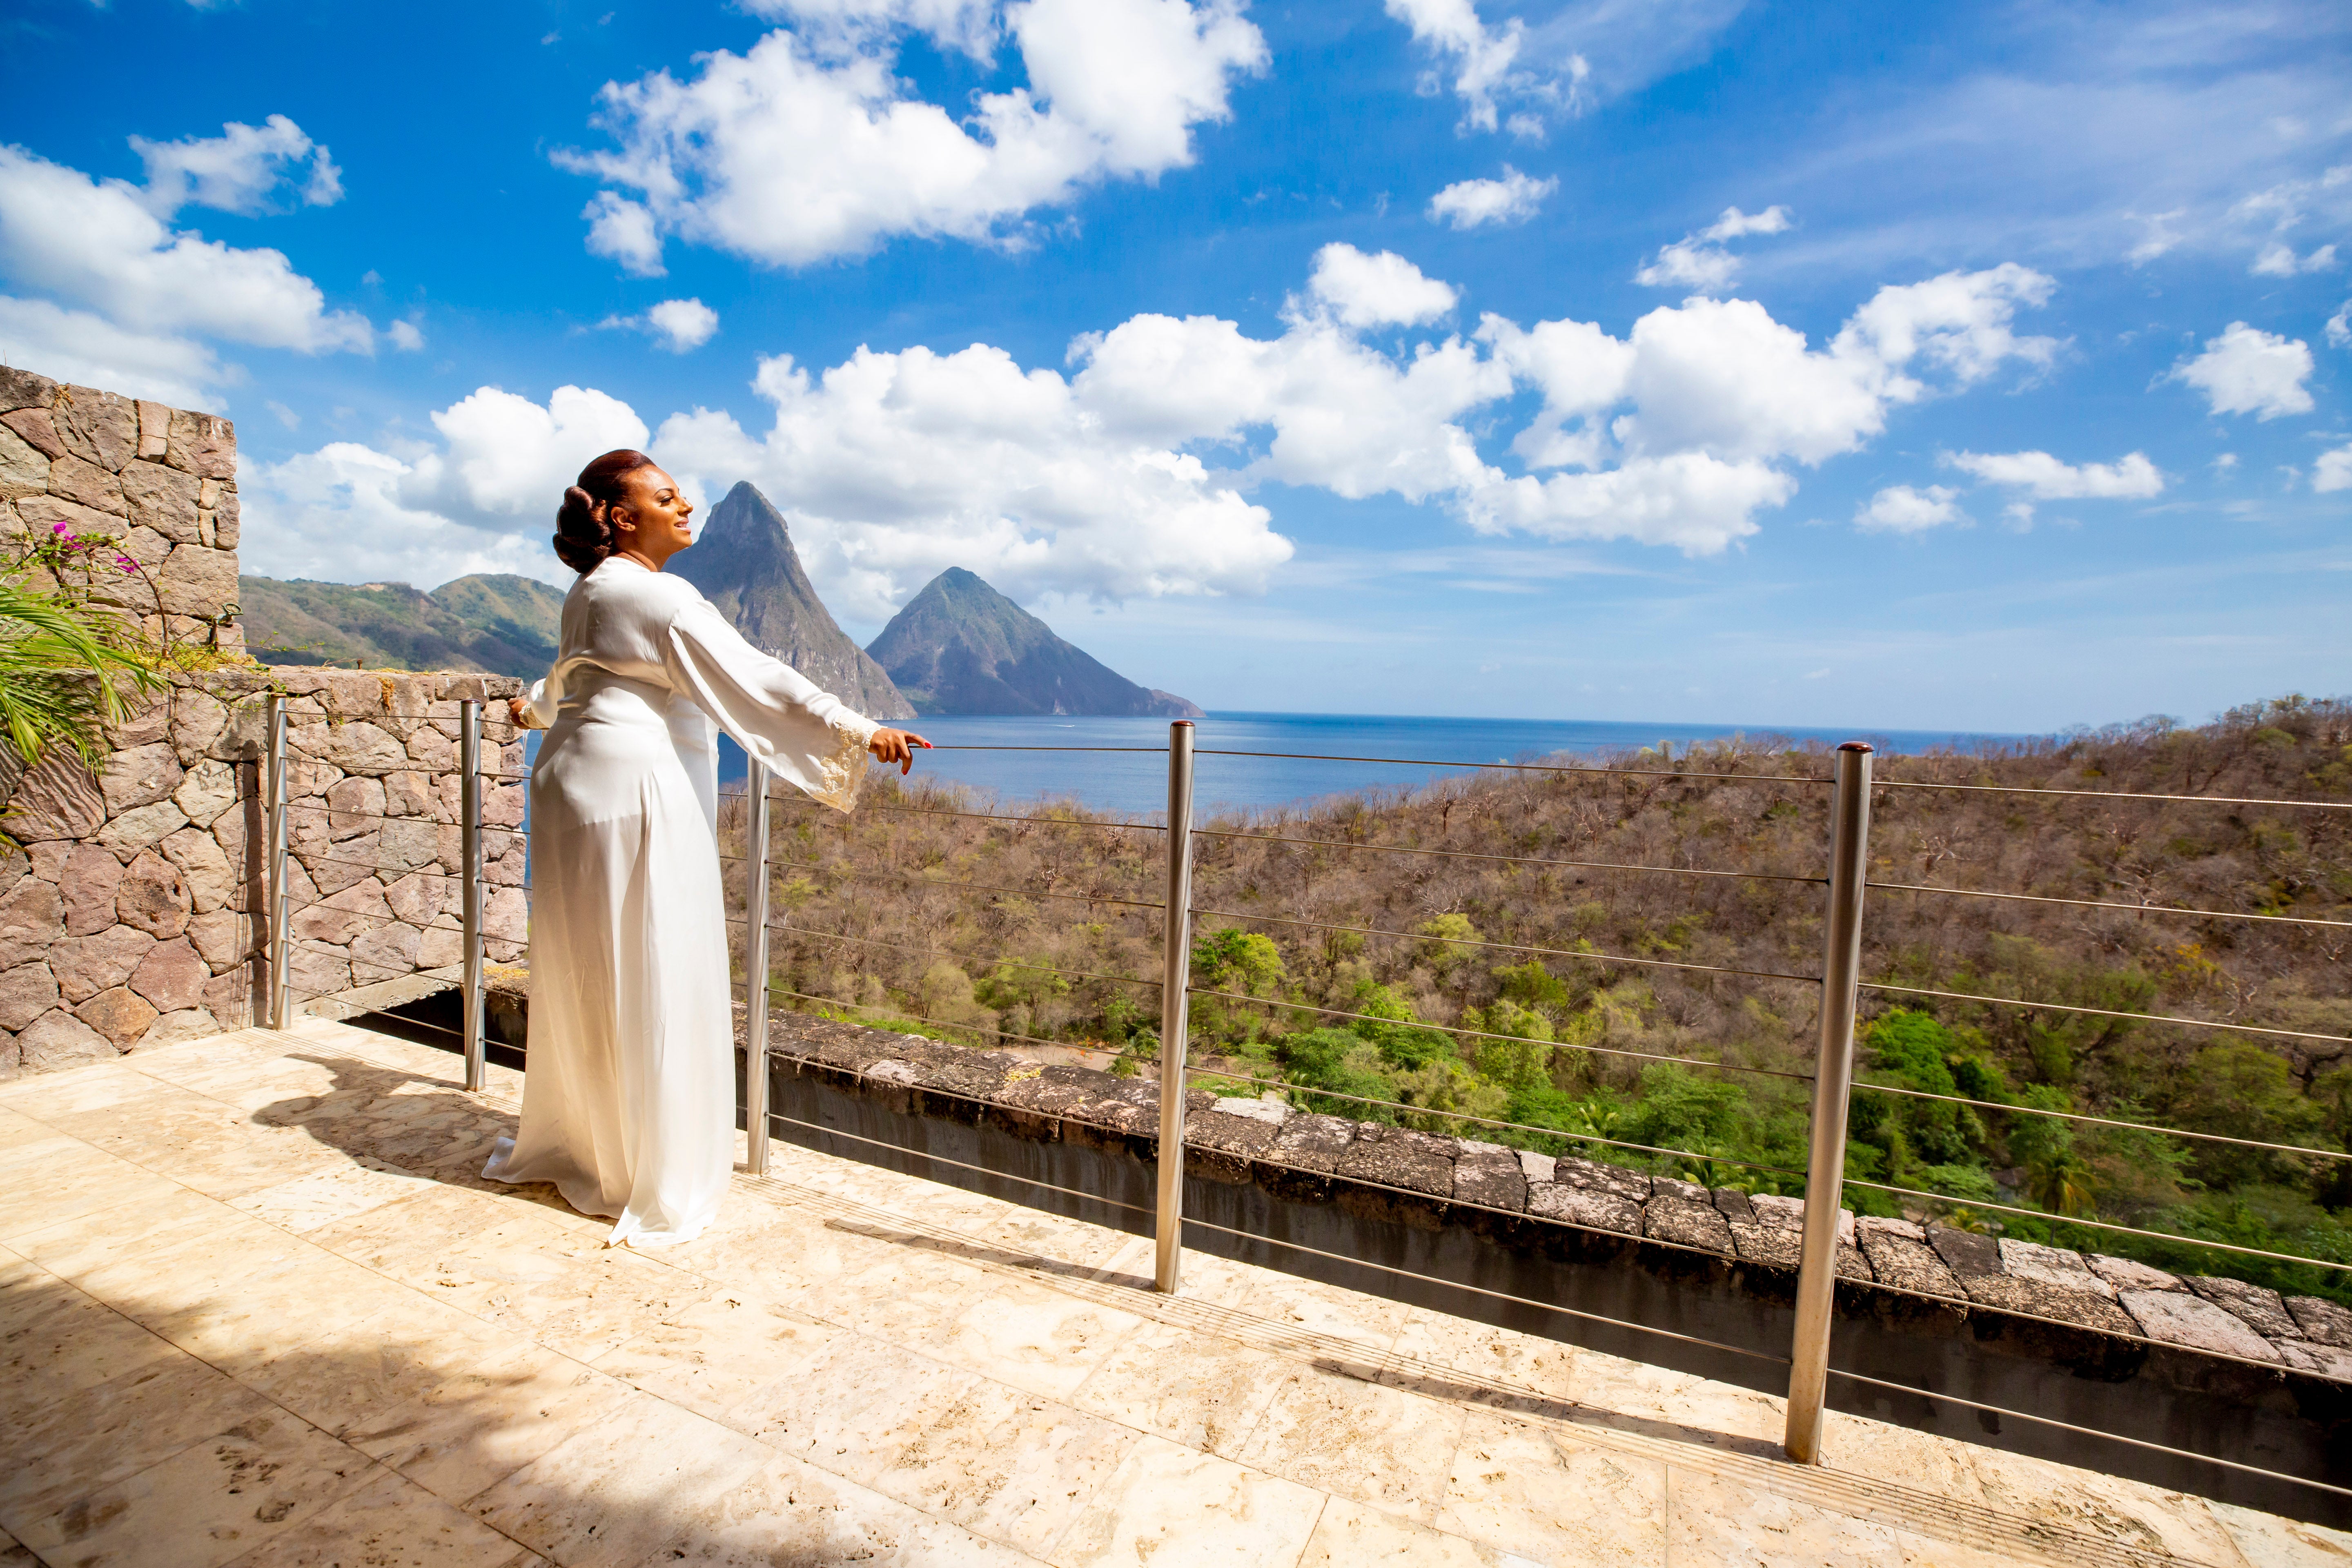 Bridal Bliss: Melissa and Hervan's Sunkissed Ceremony In St. Lucia Looked Like Absolute Paradise